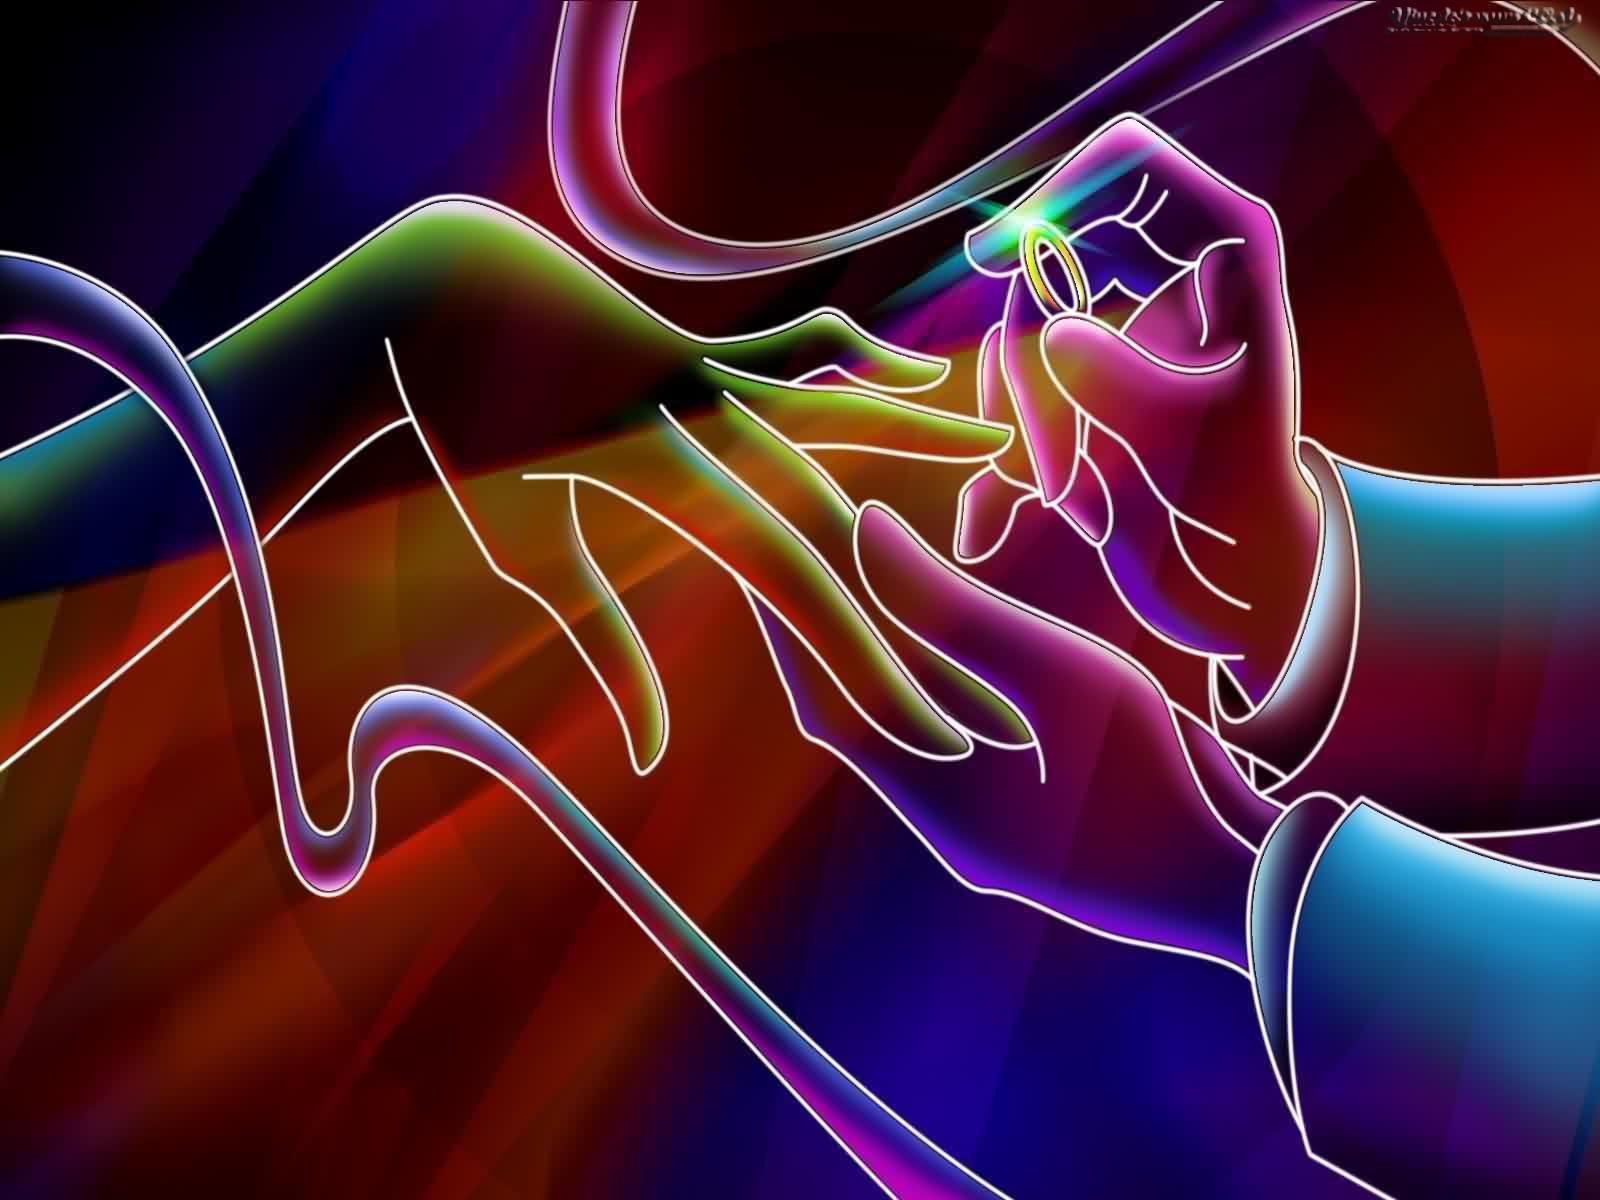 Neon Love wallpaper by karmughil25 - Download on ZEDGE™